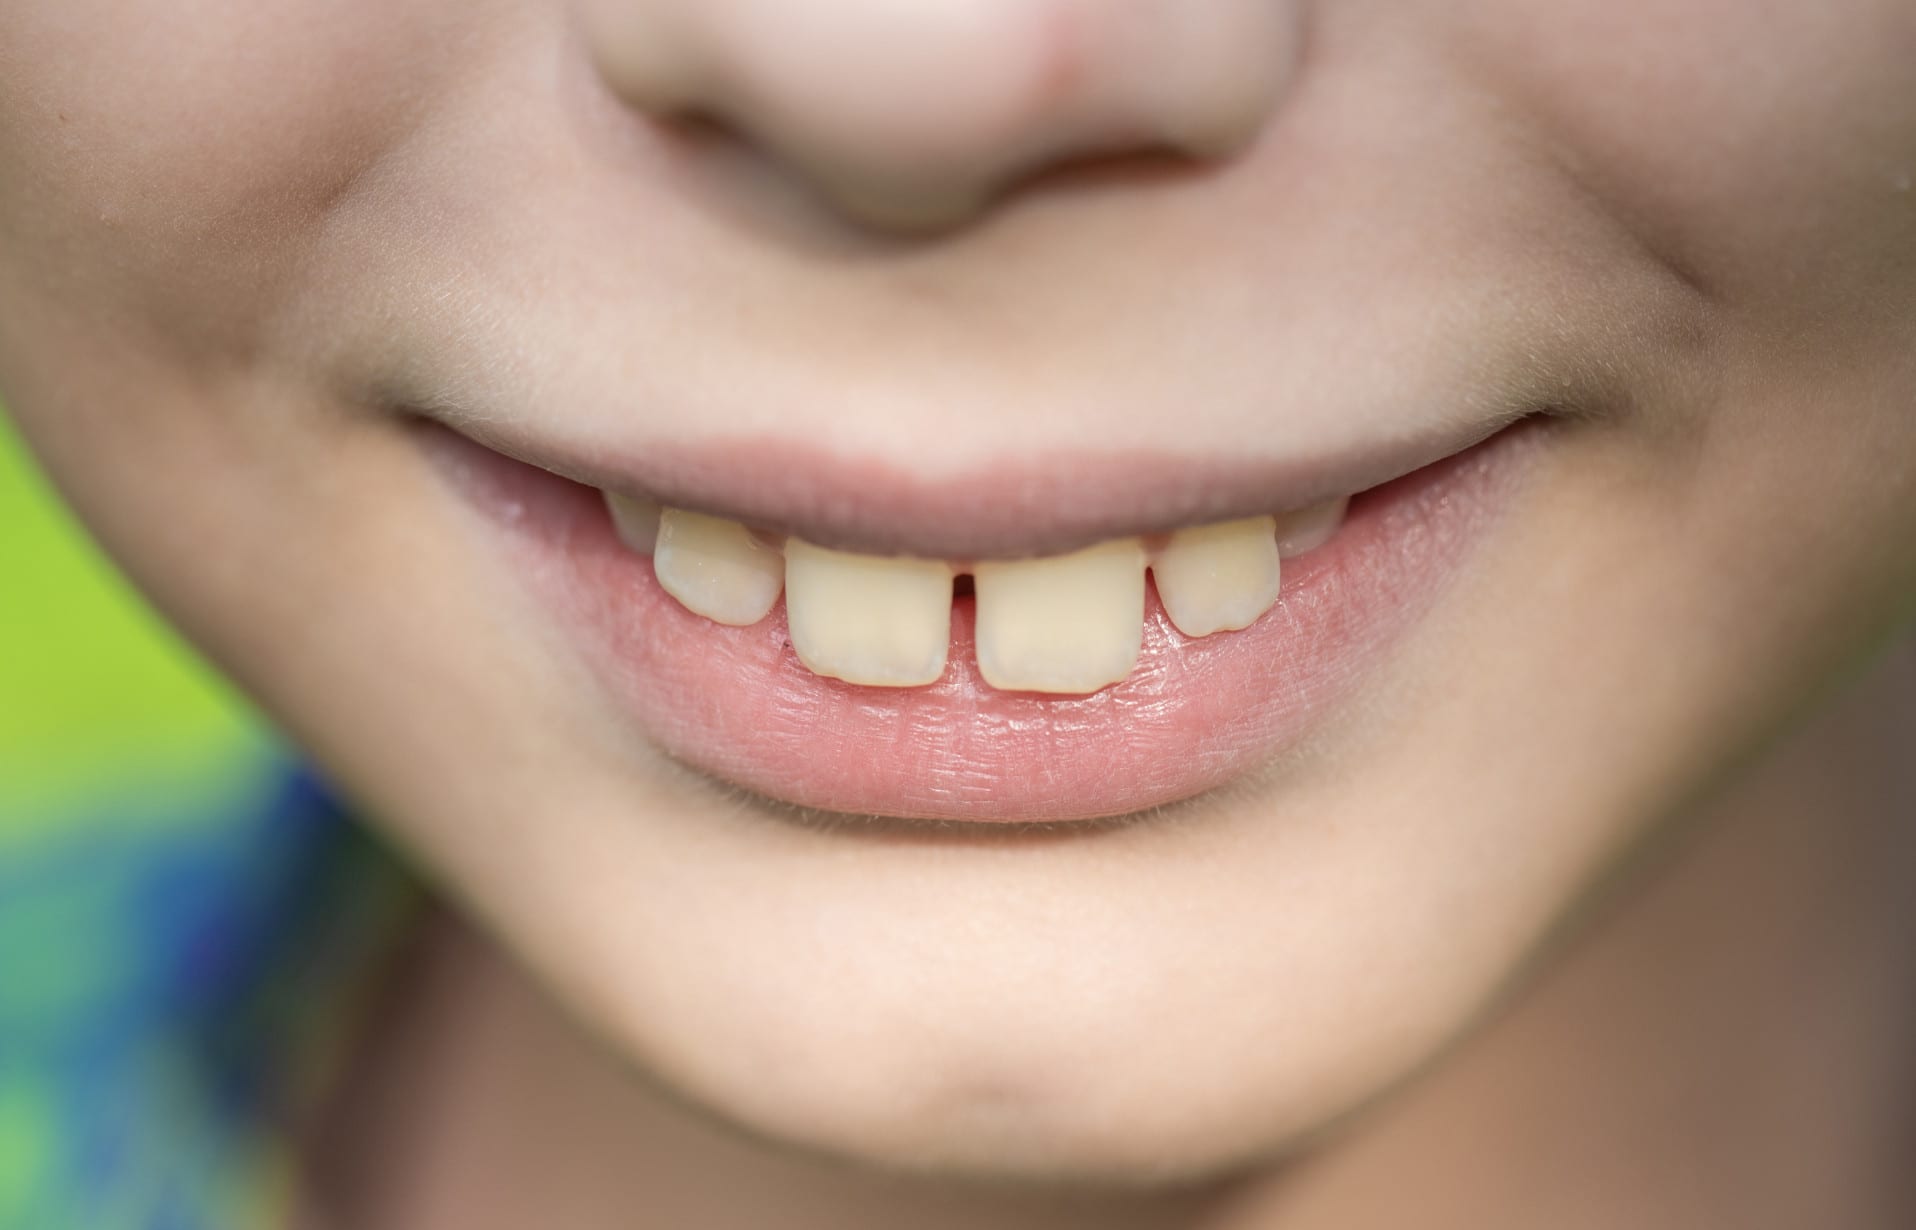 What Is An Overbite? Is an Overbite Bad for Your Teeth?